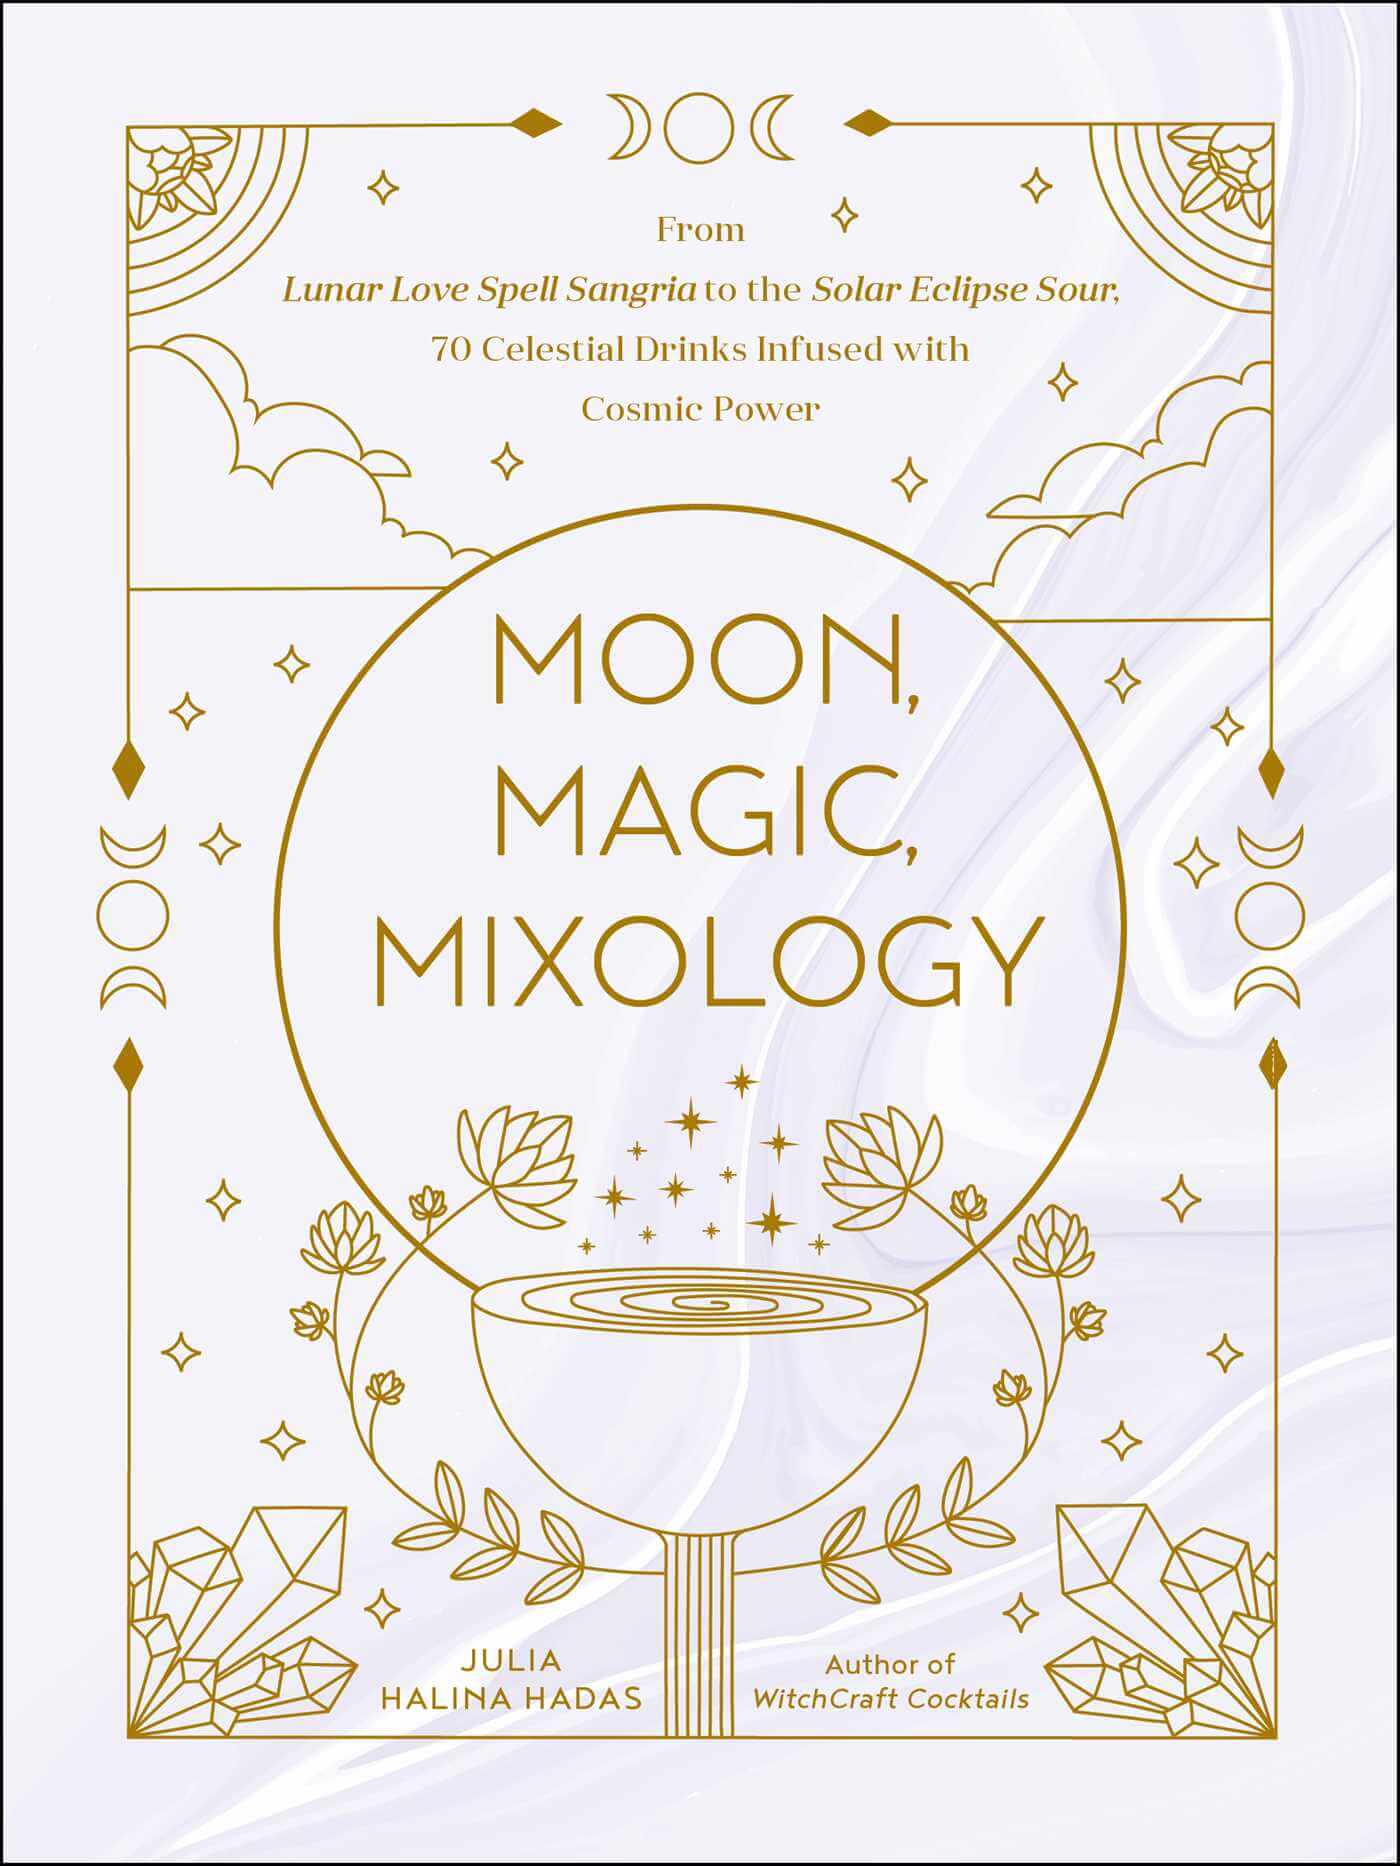 Book cover image: "Moon, Magic, Mixology" featuring celestial and lunar-themed design. The book offers 70 recipes for lunar-inspired cocktails, combining alcohol with magical tools like crystals, candles, herbs, aromatherapy, and meditations. Author Julia Halina Hadas, a practicing witch and craft cocktail enthusiast, shares her expertise in crafting magical drinks. Hardcover, 240 pages, full-color photos included.